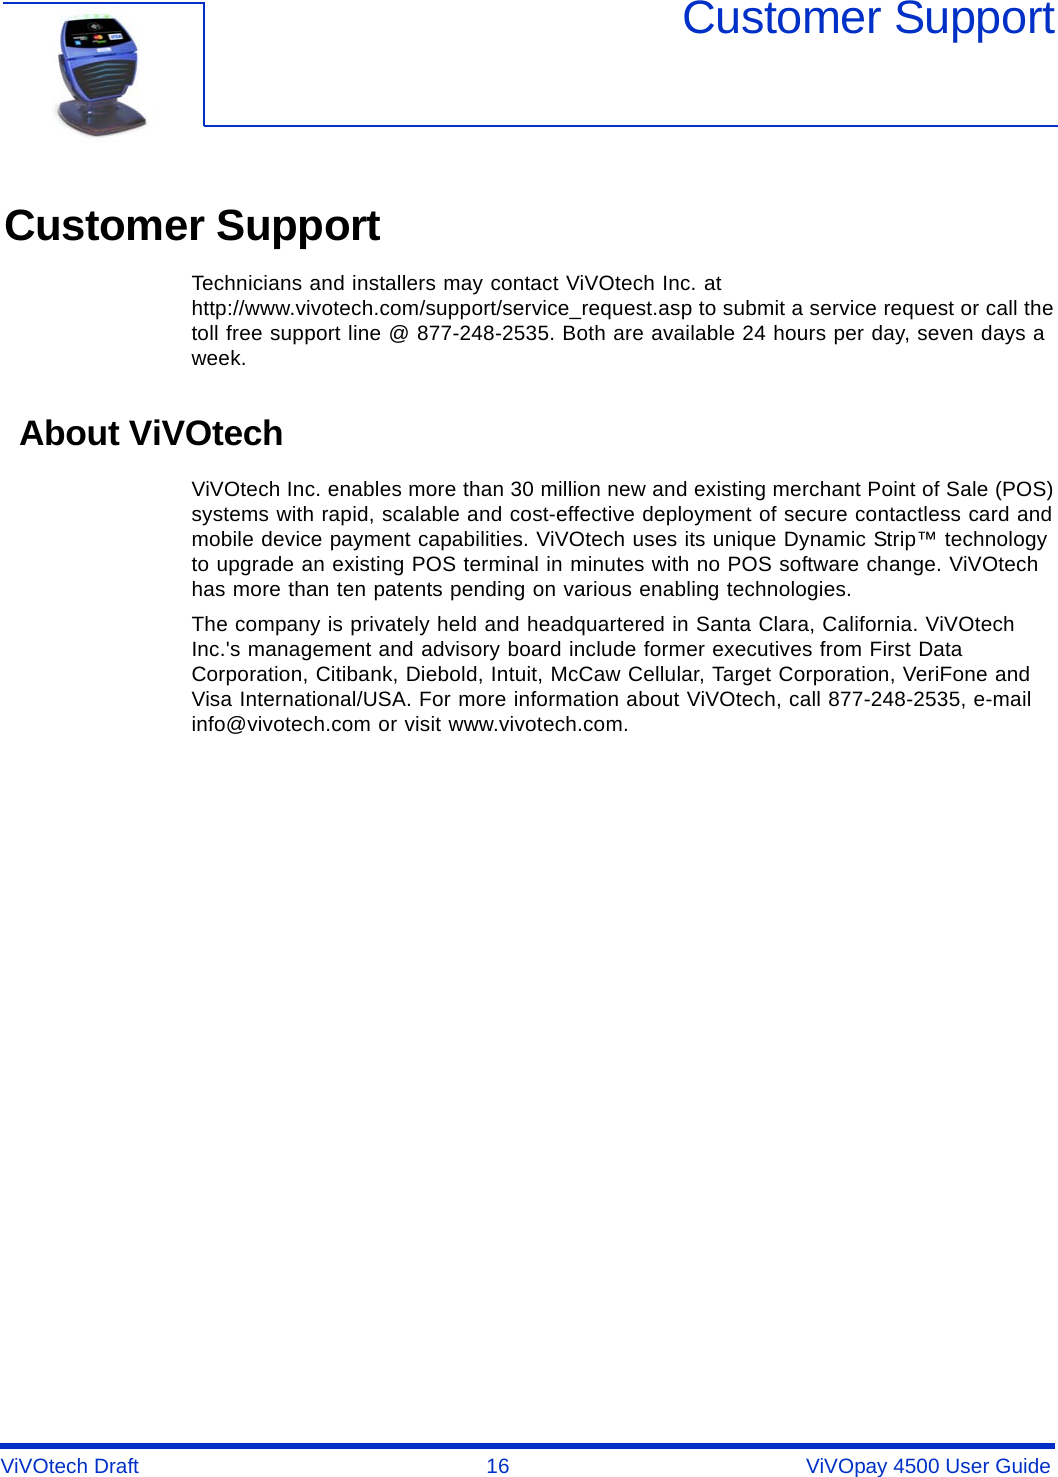 ViVOtech Draft  16   ViVOpay 4500 User GuideCustomer SupportCustomer SupportTechnicians and installers may contact ViVOtech Inc. at http://www.vivotech.com/support/service_request.asp to submit a service request or call the toll free support line @ 877-248-2535. Both are available 24 hours per day, seven days a week. About ViVOtechViVOtech Inc. enables more than 30 million new and existing merchant Point of Sale (POS) systems with rapid, scalable and cost-effective deployment of secure contactless card and mobile device payment capabilities. ViVOtech uses its unique Dynamic Strip™ technology to upgrade an existing POS terminal in minutes with no POS software change. ViVOtech has more than ten patents pending on various enabling technologies. The company is privately held and headquartered in Santa Clara, California. ViVOtech Inc.&apos;s management and advisory board include former executives from First Data Corporation, Citibank, Diebold, Intuit, McCaw Cellular, Target Corporation, VeriFone and Visa International/USA. For more information about ViVOtech, call 877-248-2535, e-mail info@vivotech.com or visit www.vivotech.com.